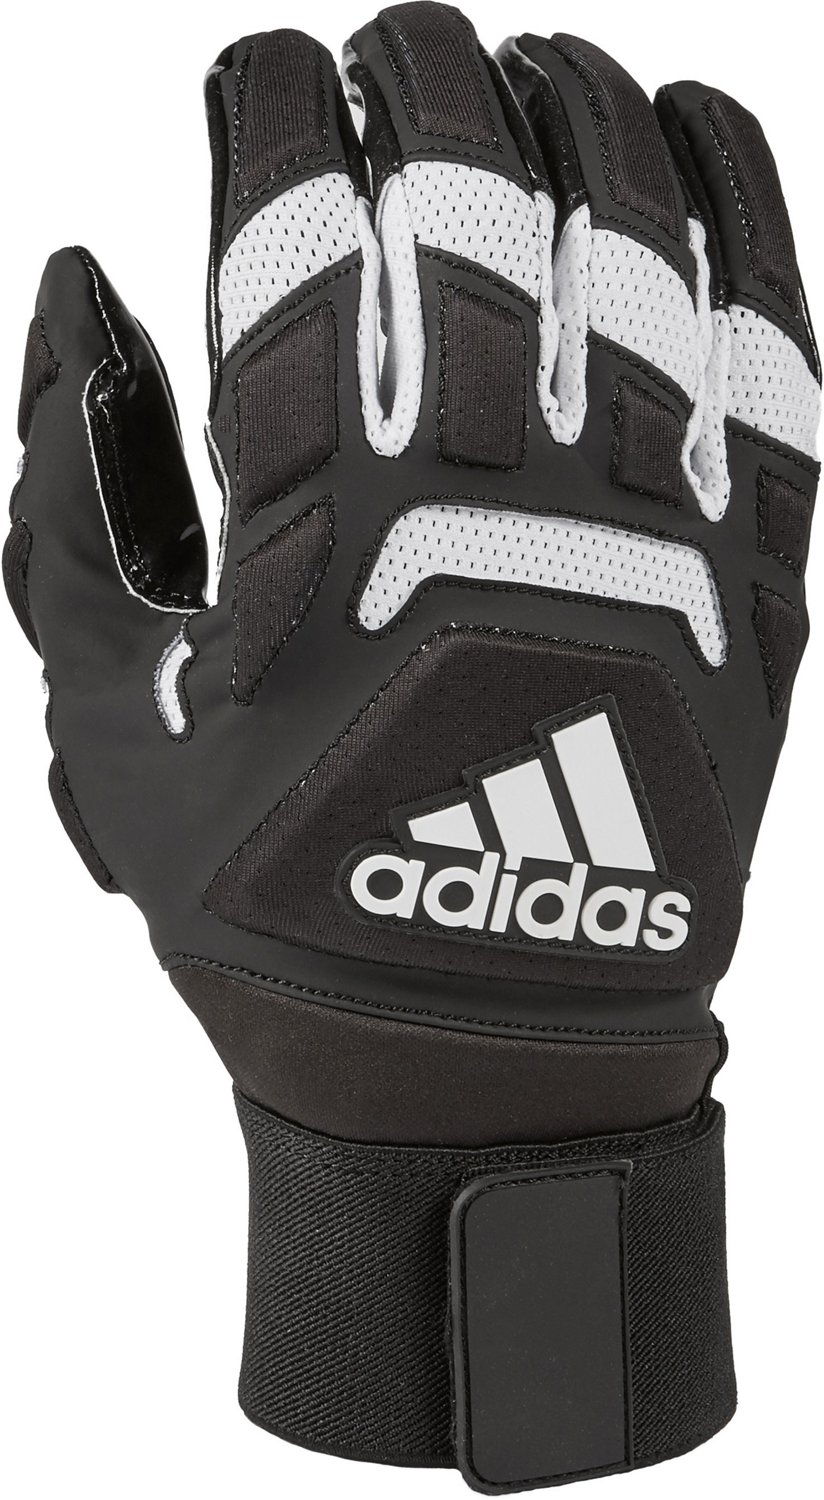 Football Gloves for Youth \u0026 Adults 